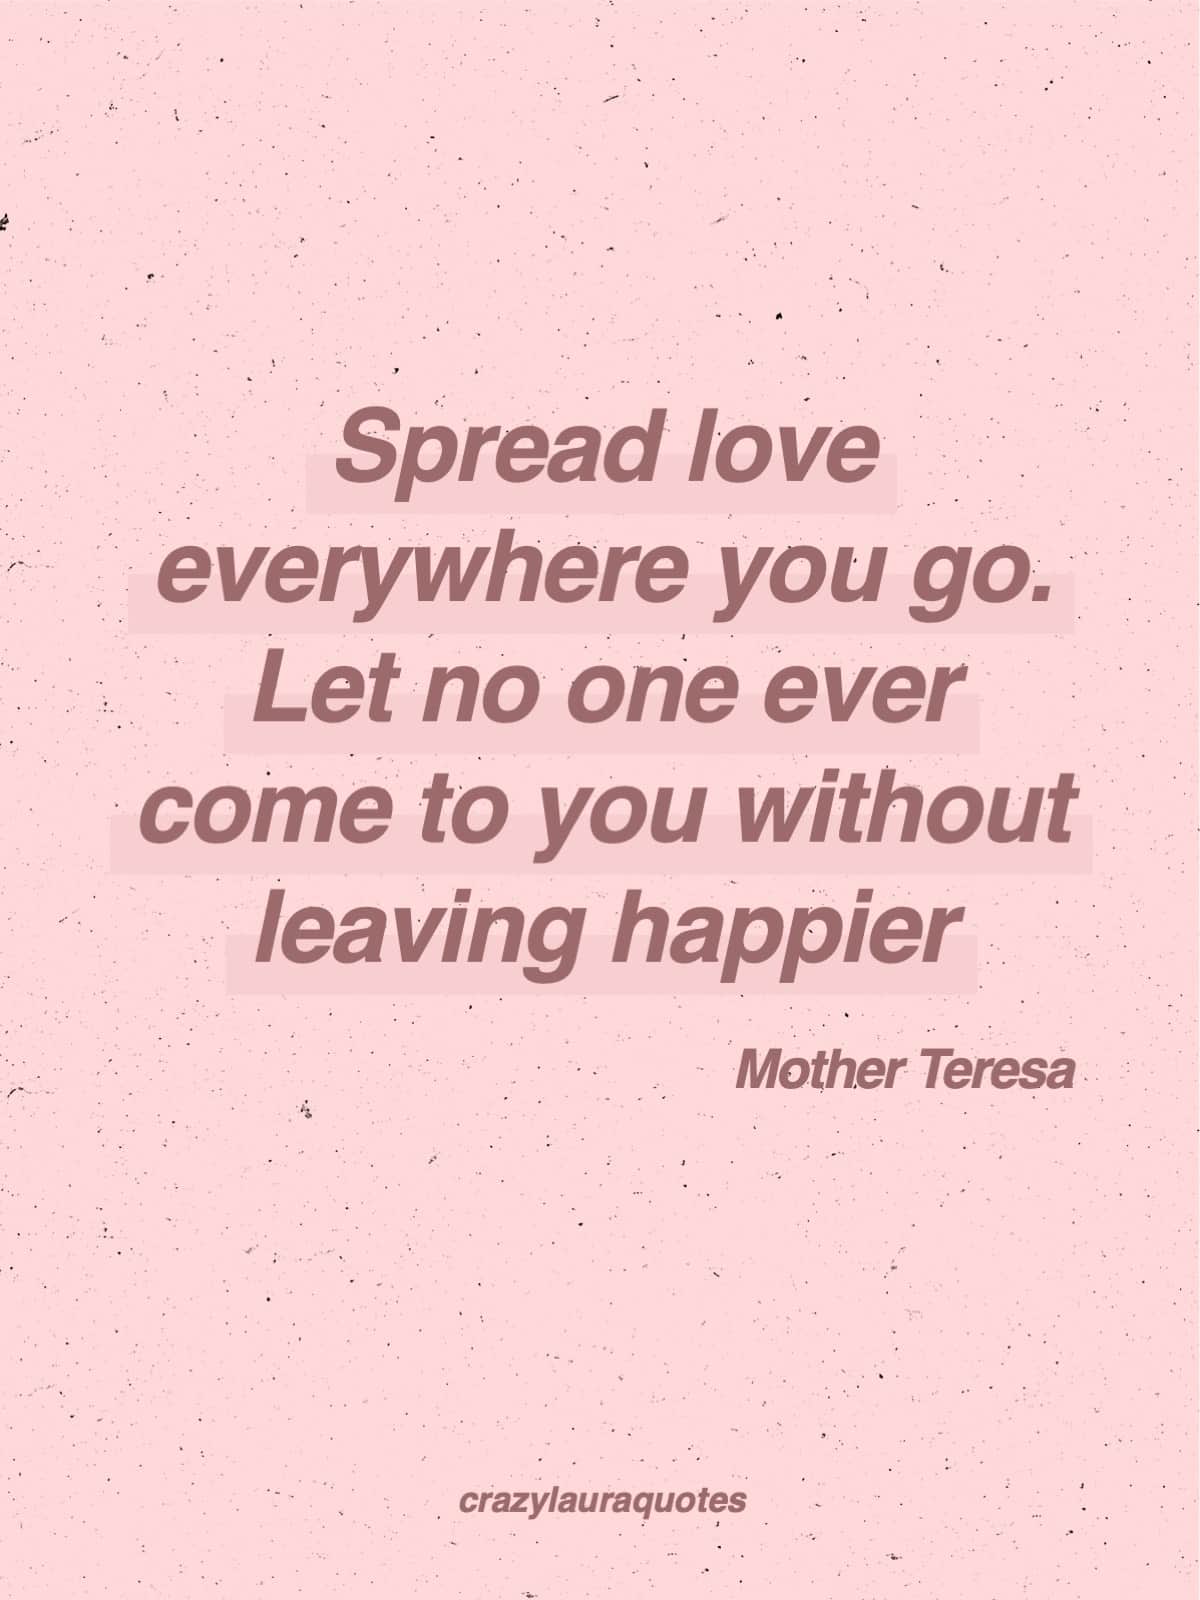 Spread your love everywhere you go. - Quote